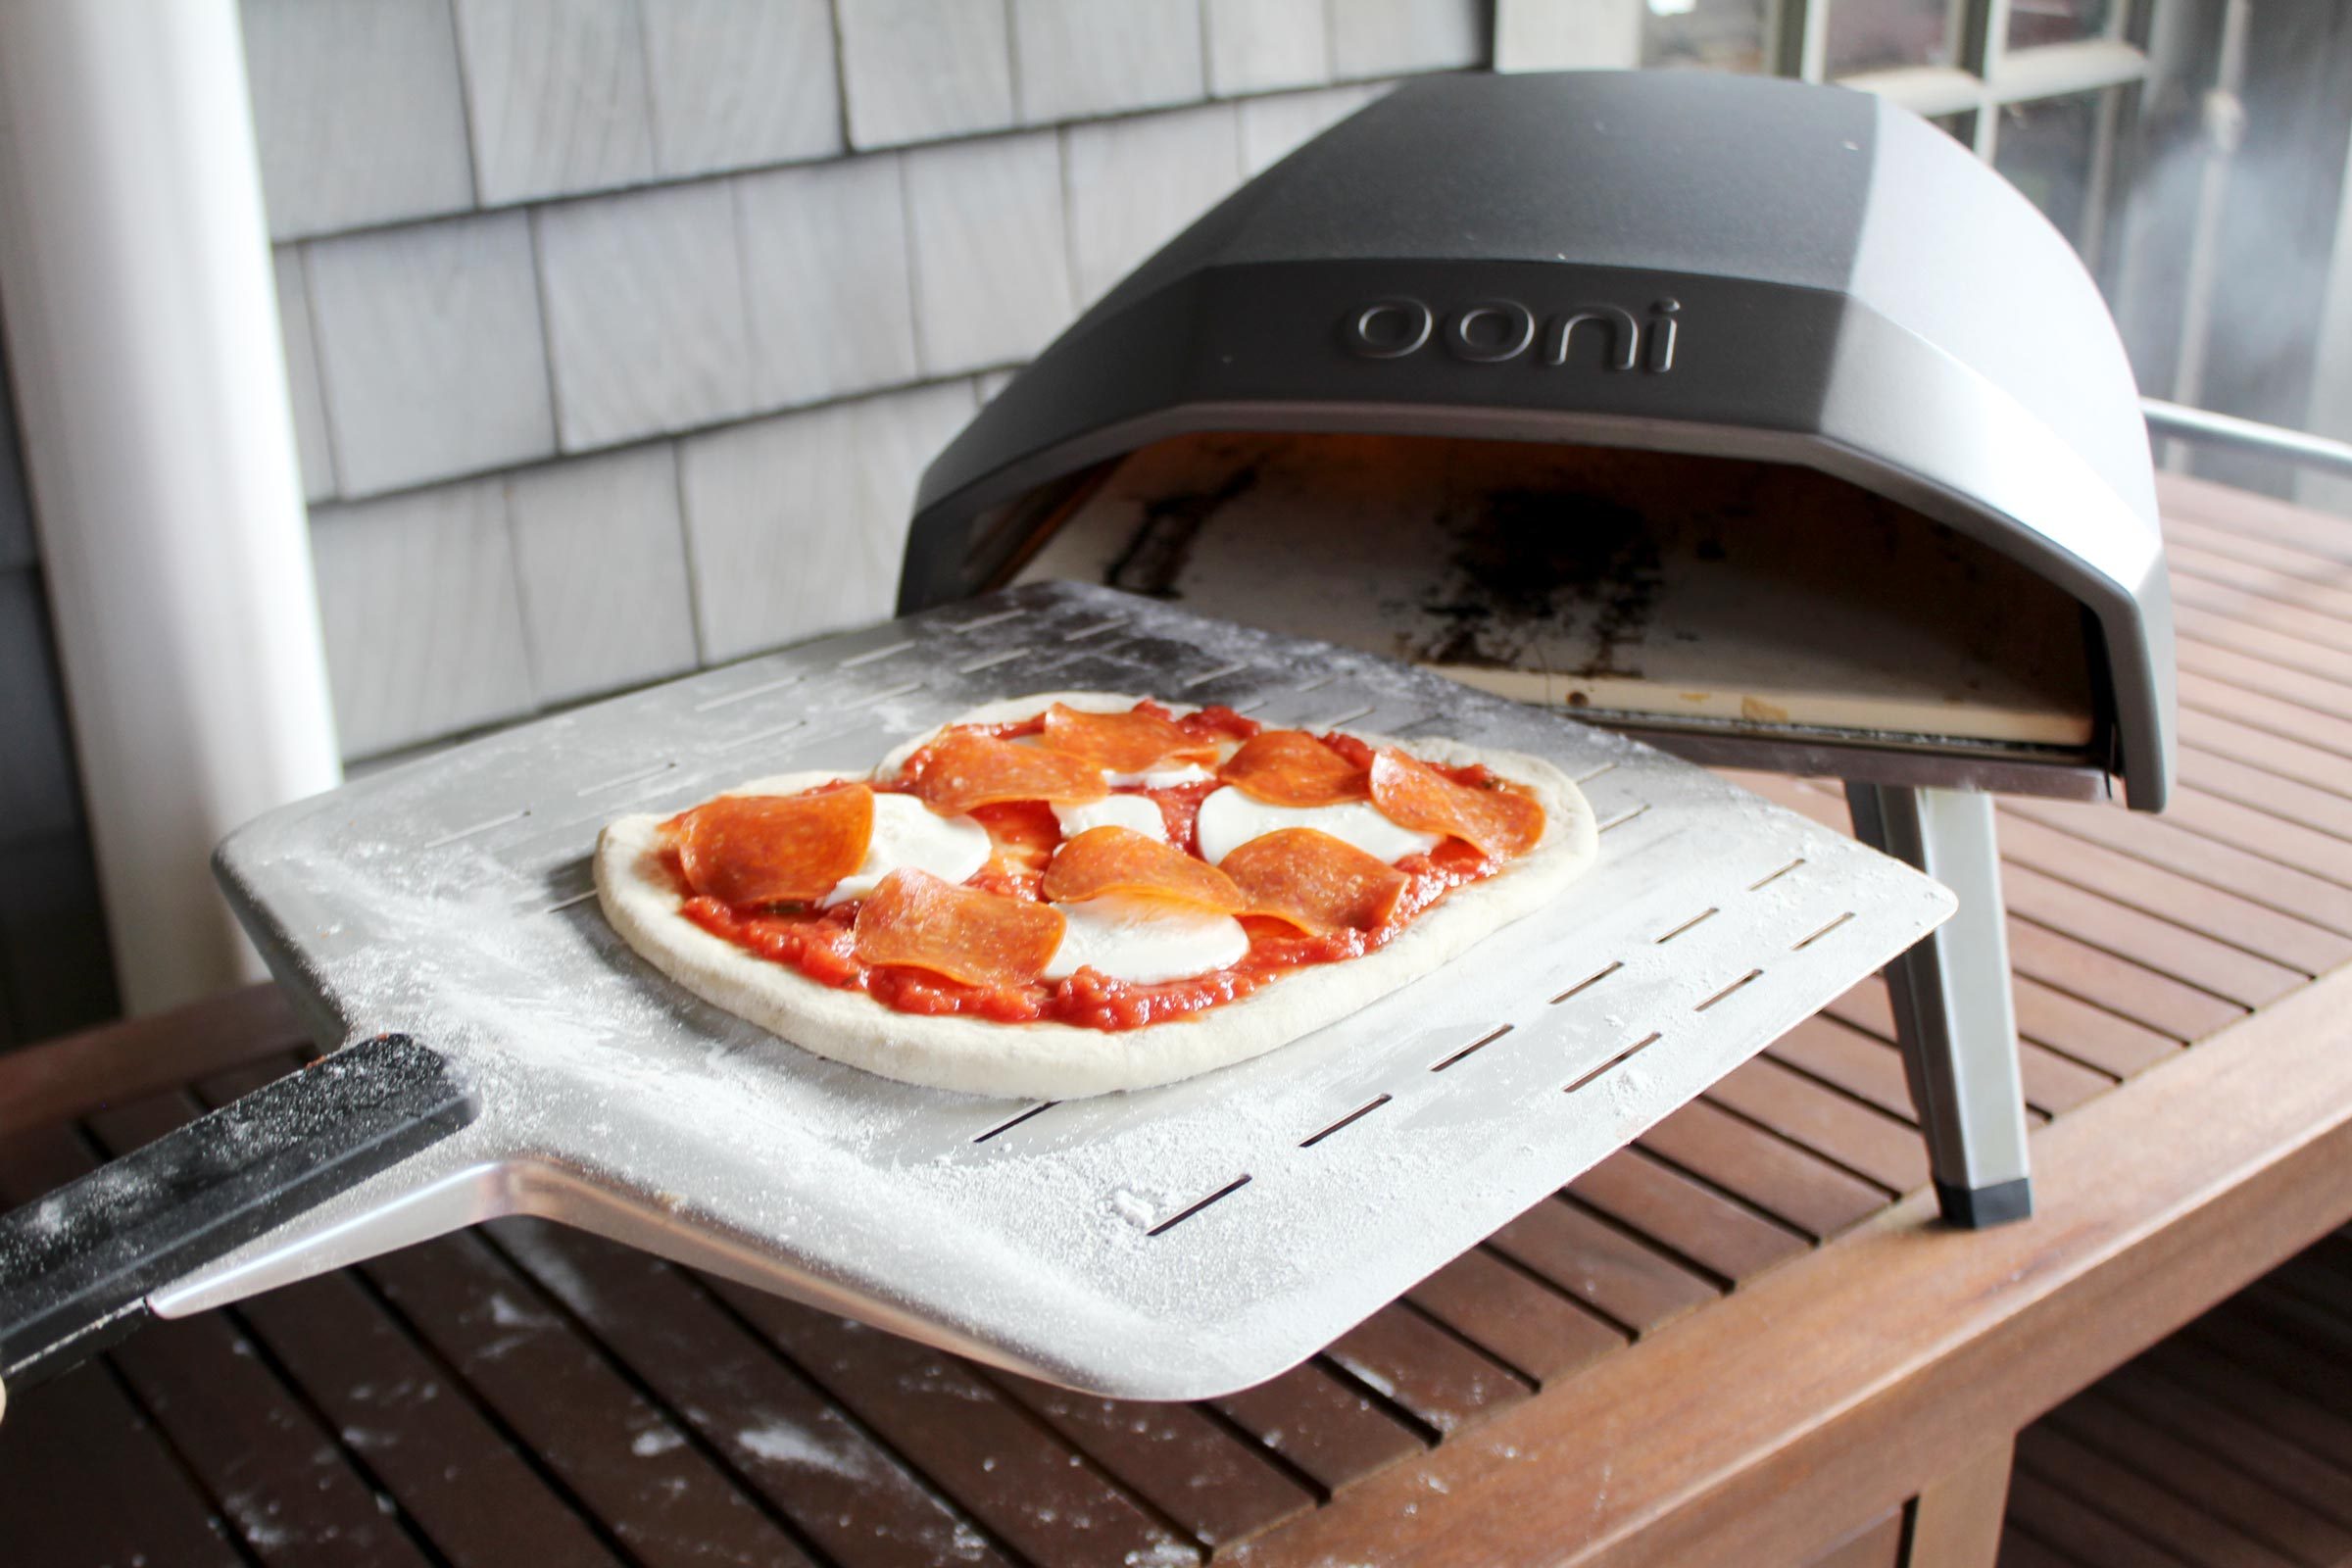 Toh Launching Ooni Pizza Oven Social Camryn Rabideau For Taste Of Home